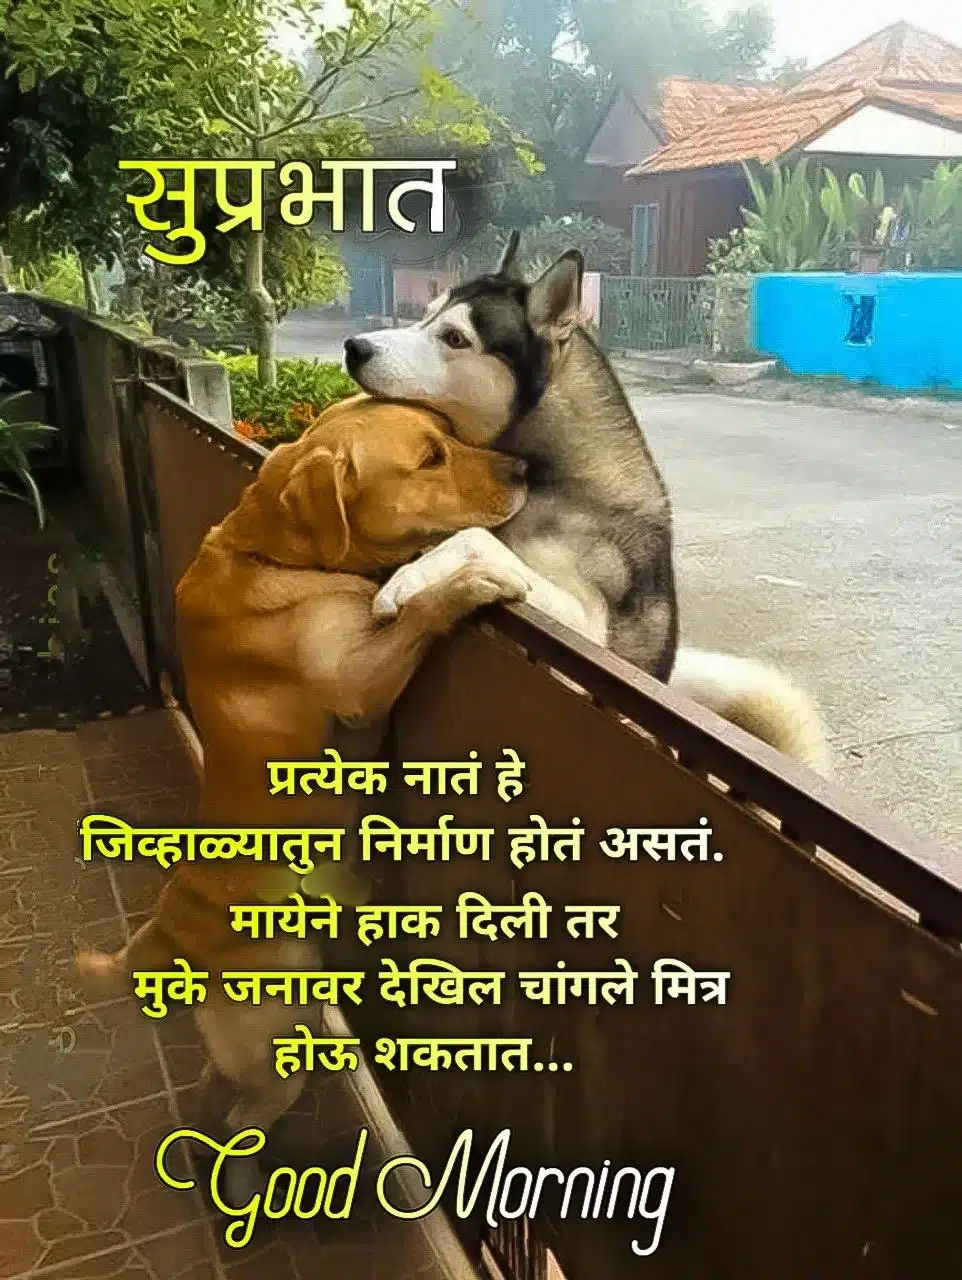 Meaningful Relationship Good Morning Message In Marathi